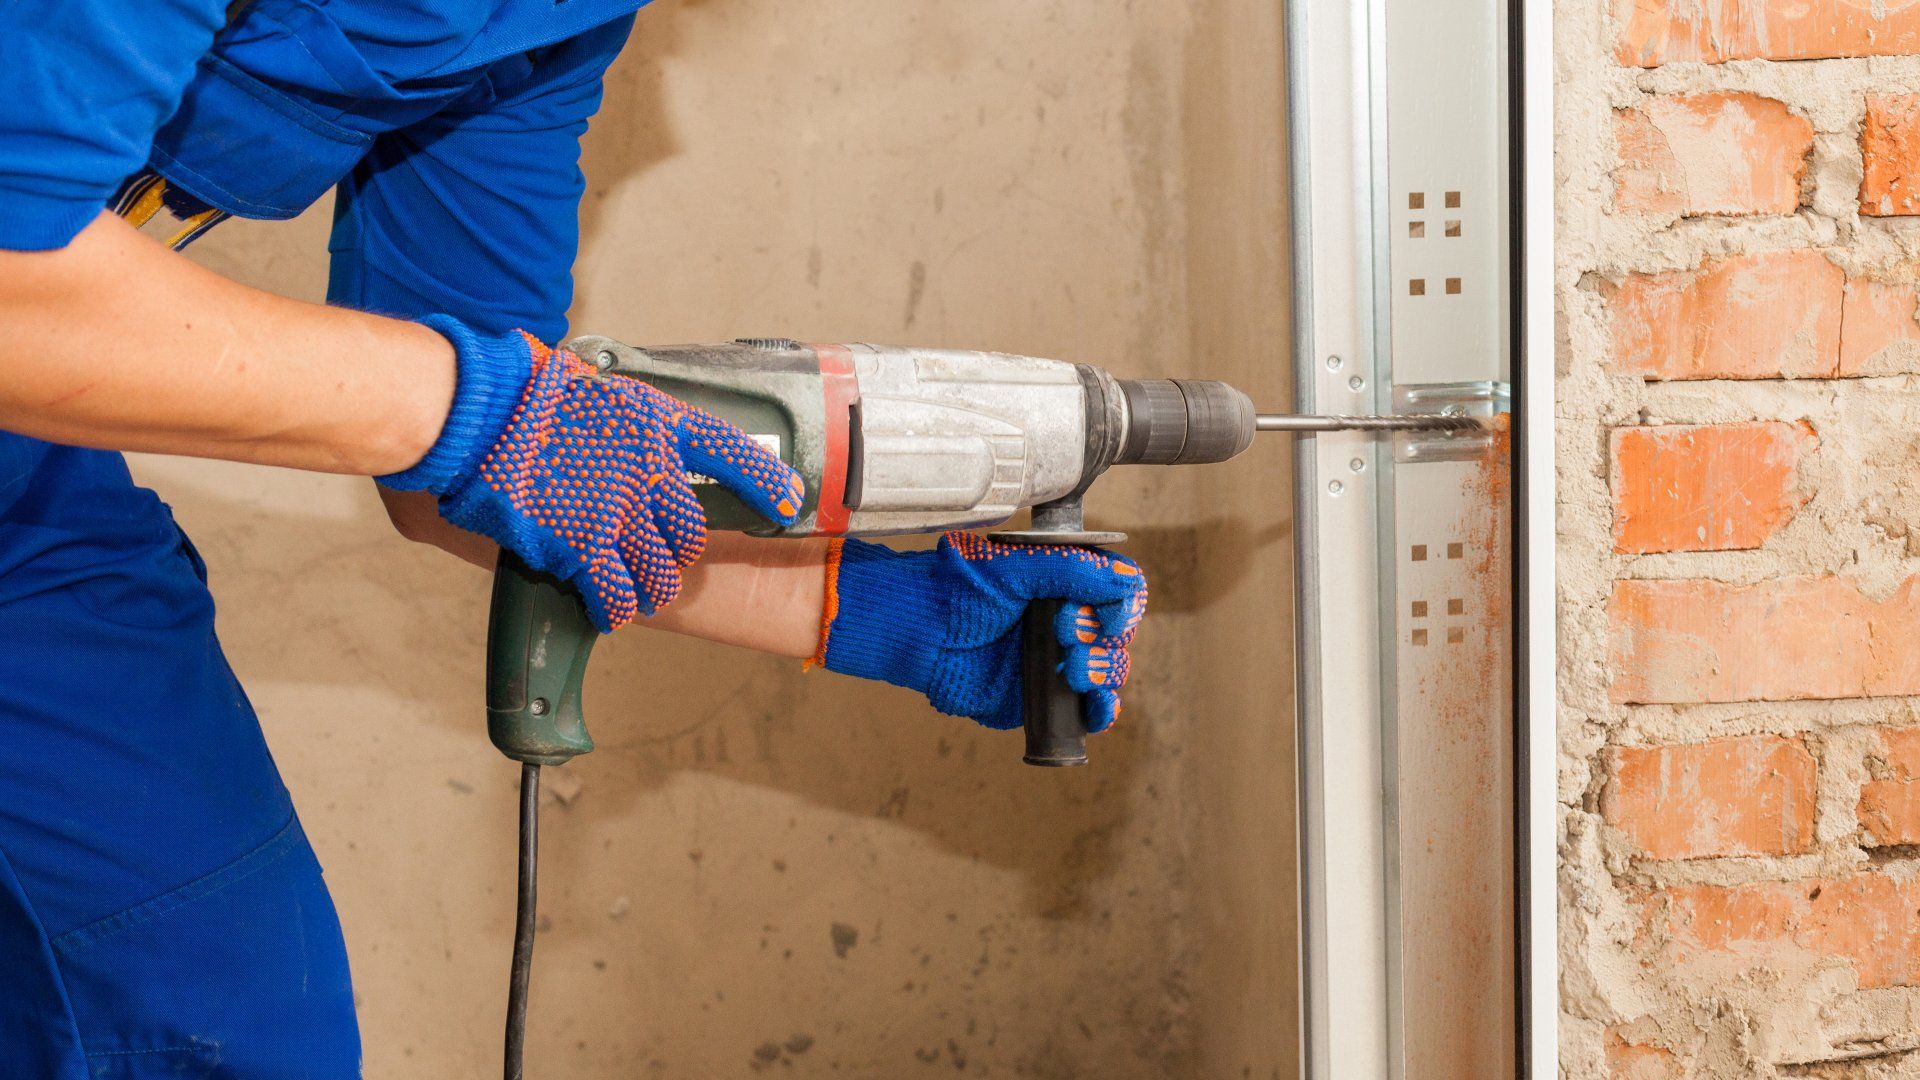 Panoramic and cropped view of professional worker holding electric drills in hands, making hole in brick copy space wall, install metal rail on garage door system